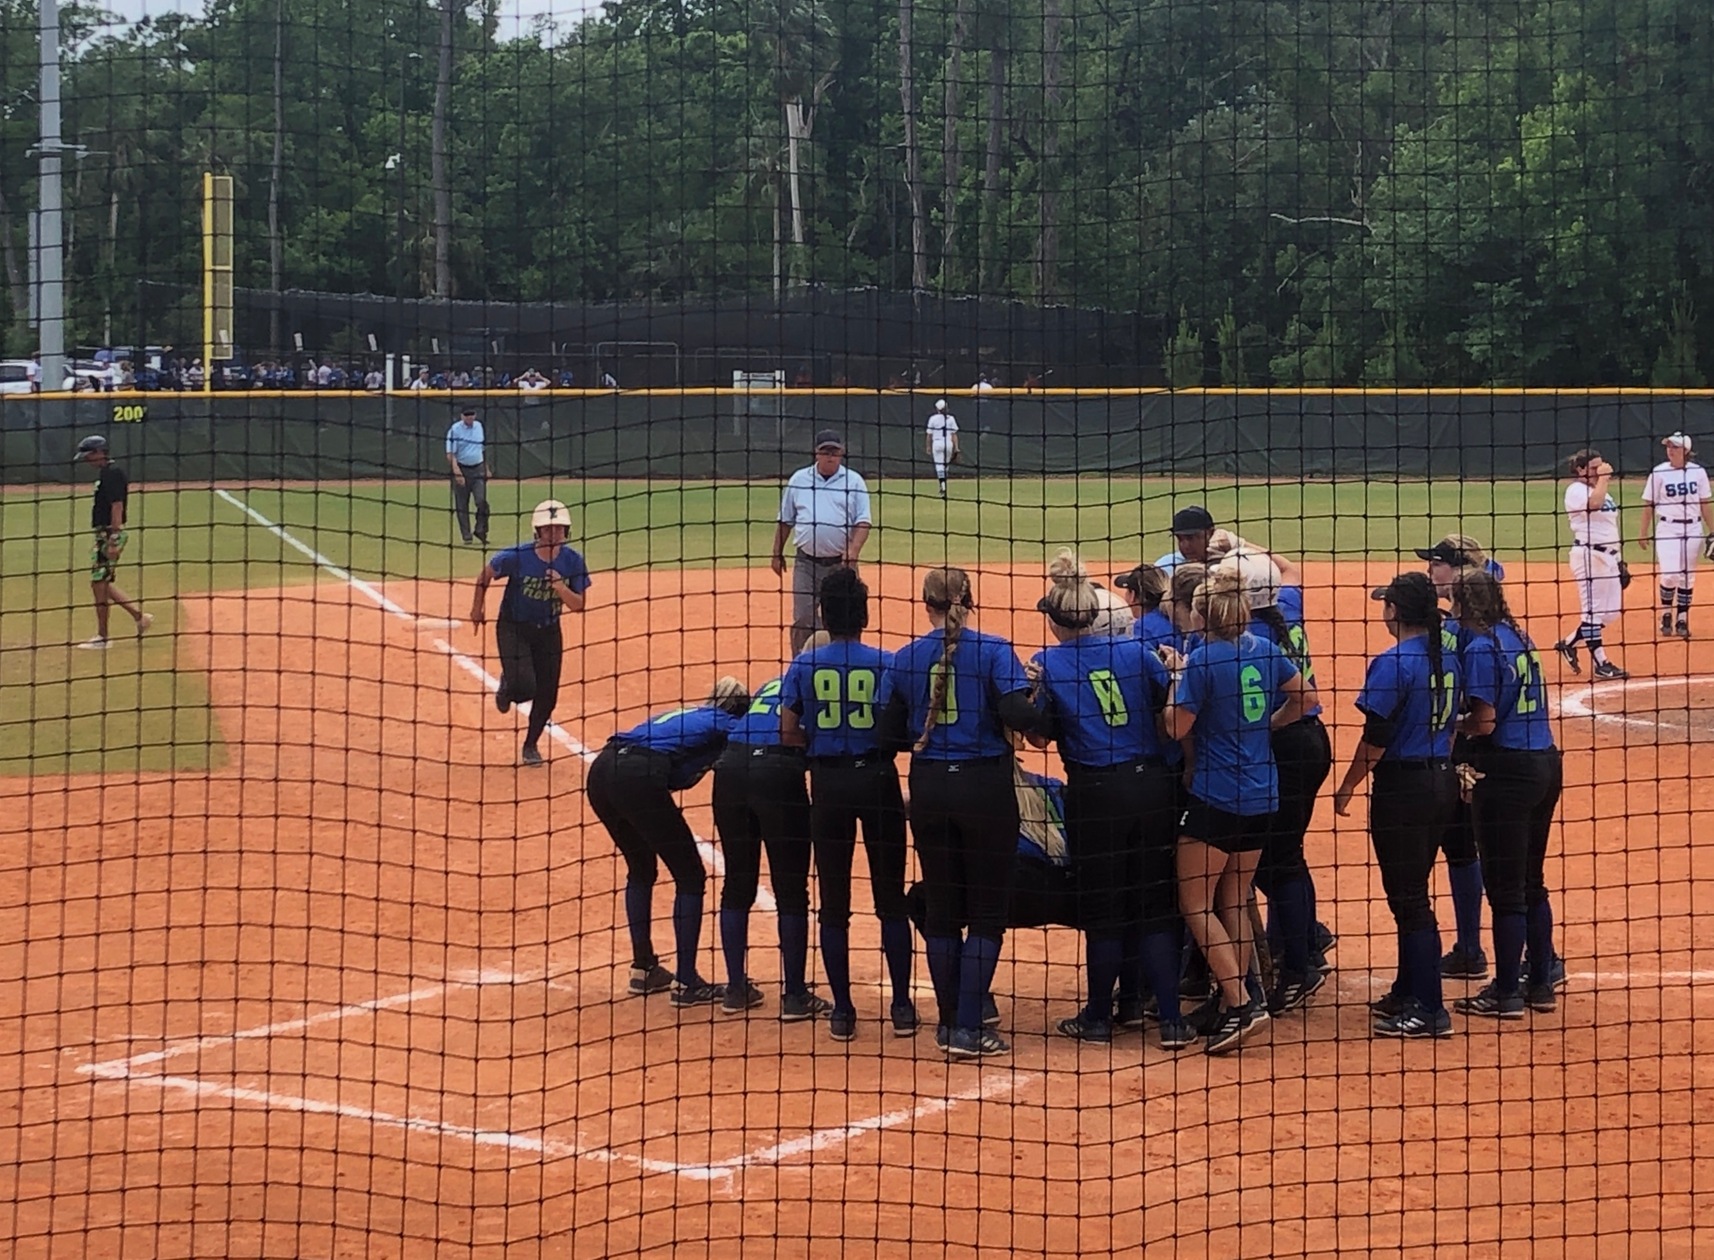 Softball team falls in state tournament, finishes with 30 wins